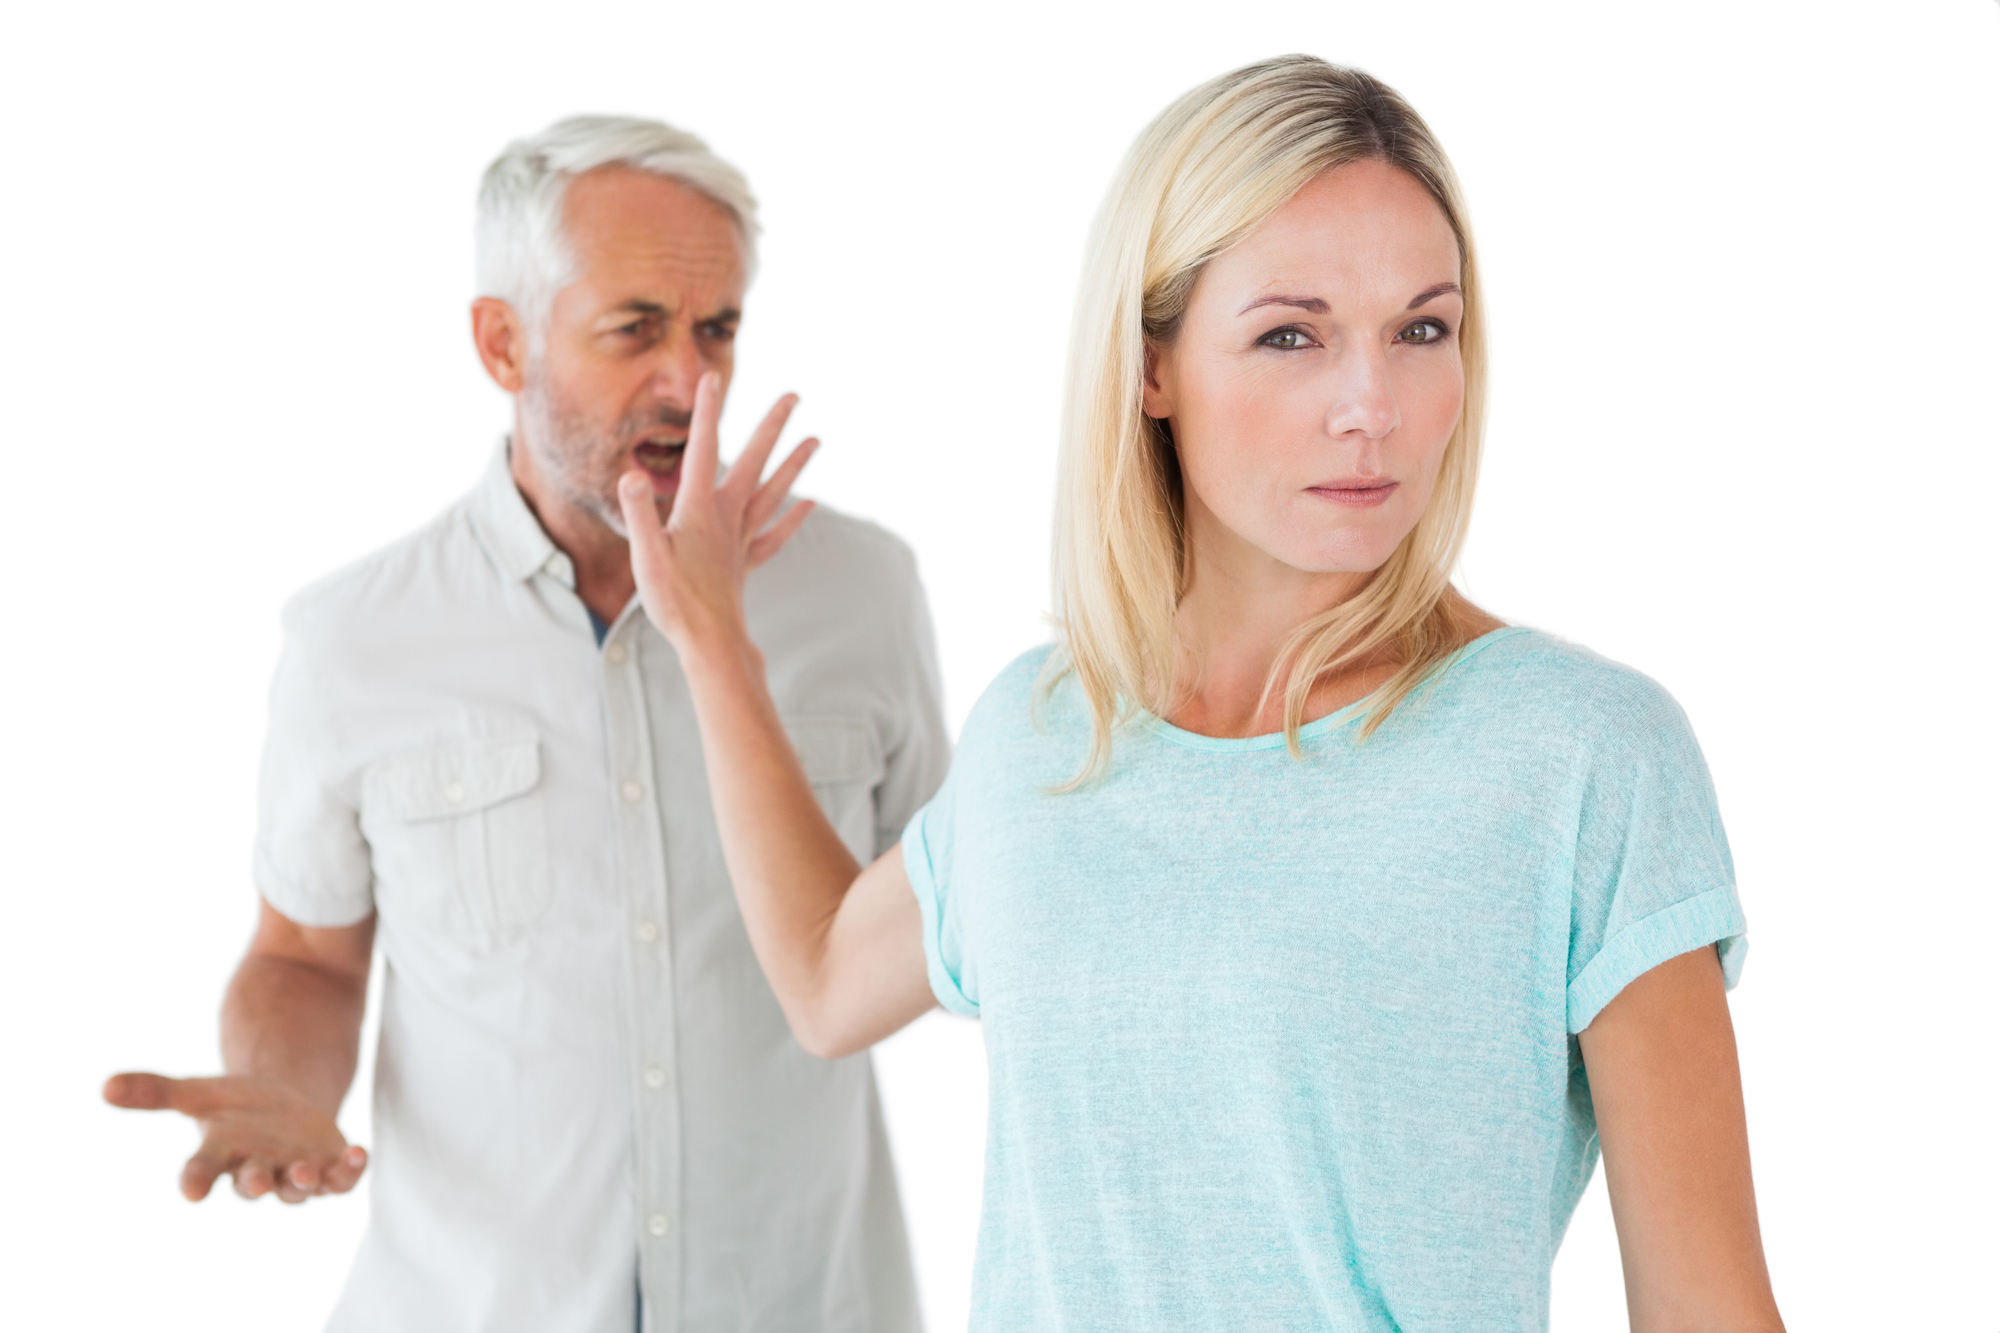 Woman not listening to her angry partner on white background